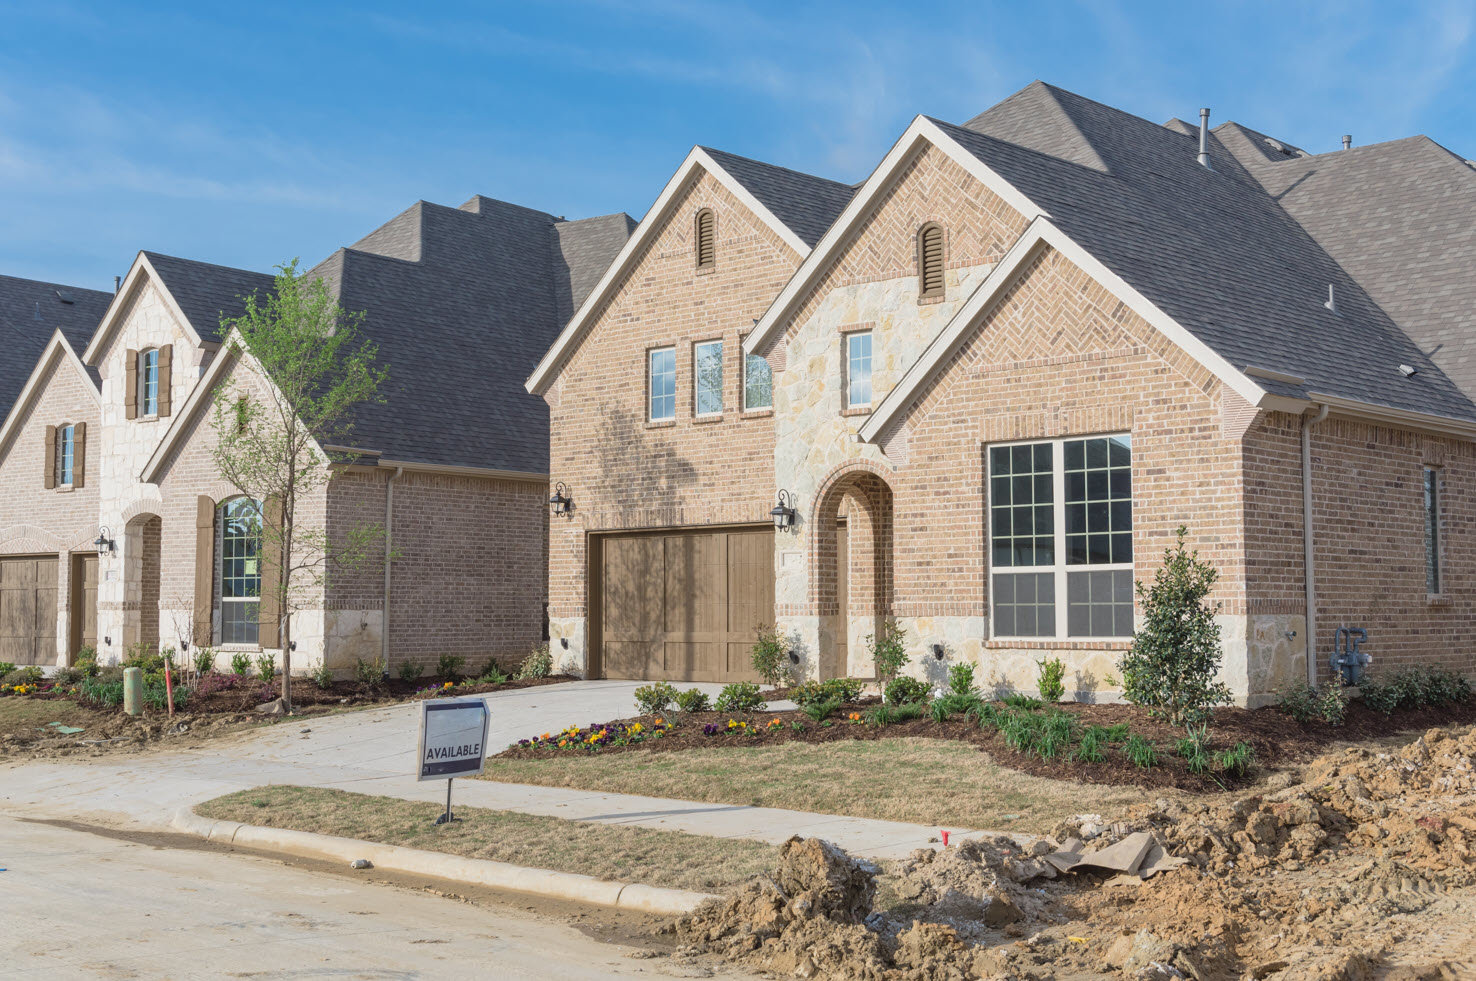 New Construction Builder Homes & Condos For Sale in Fort Worth, TX